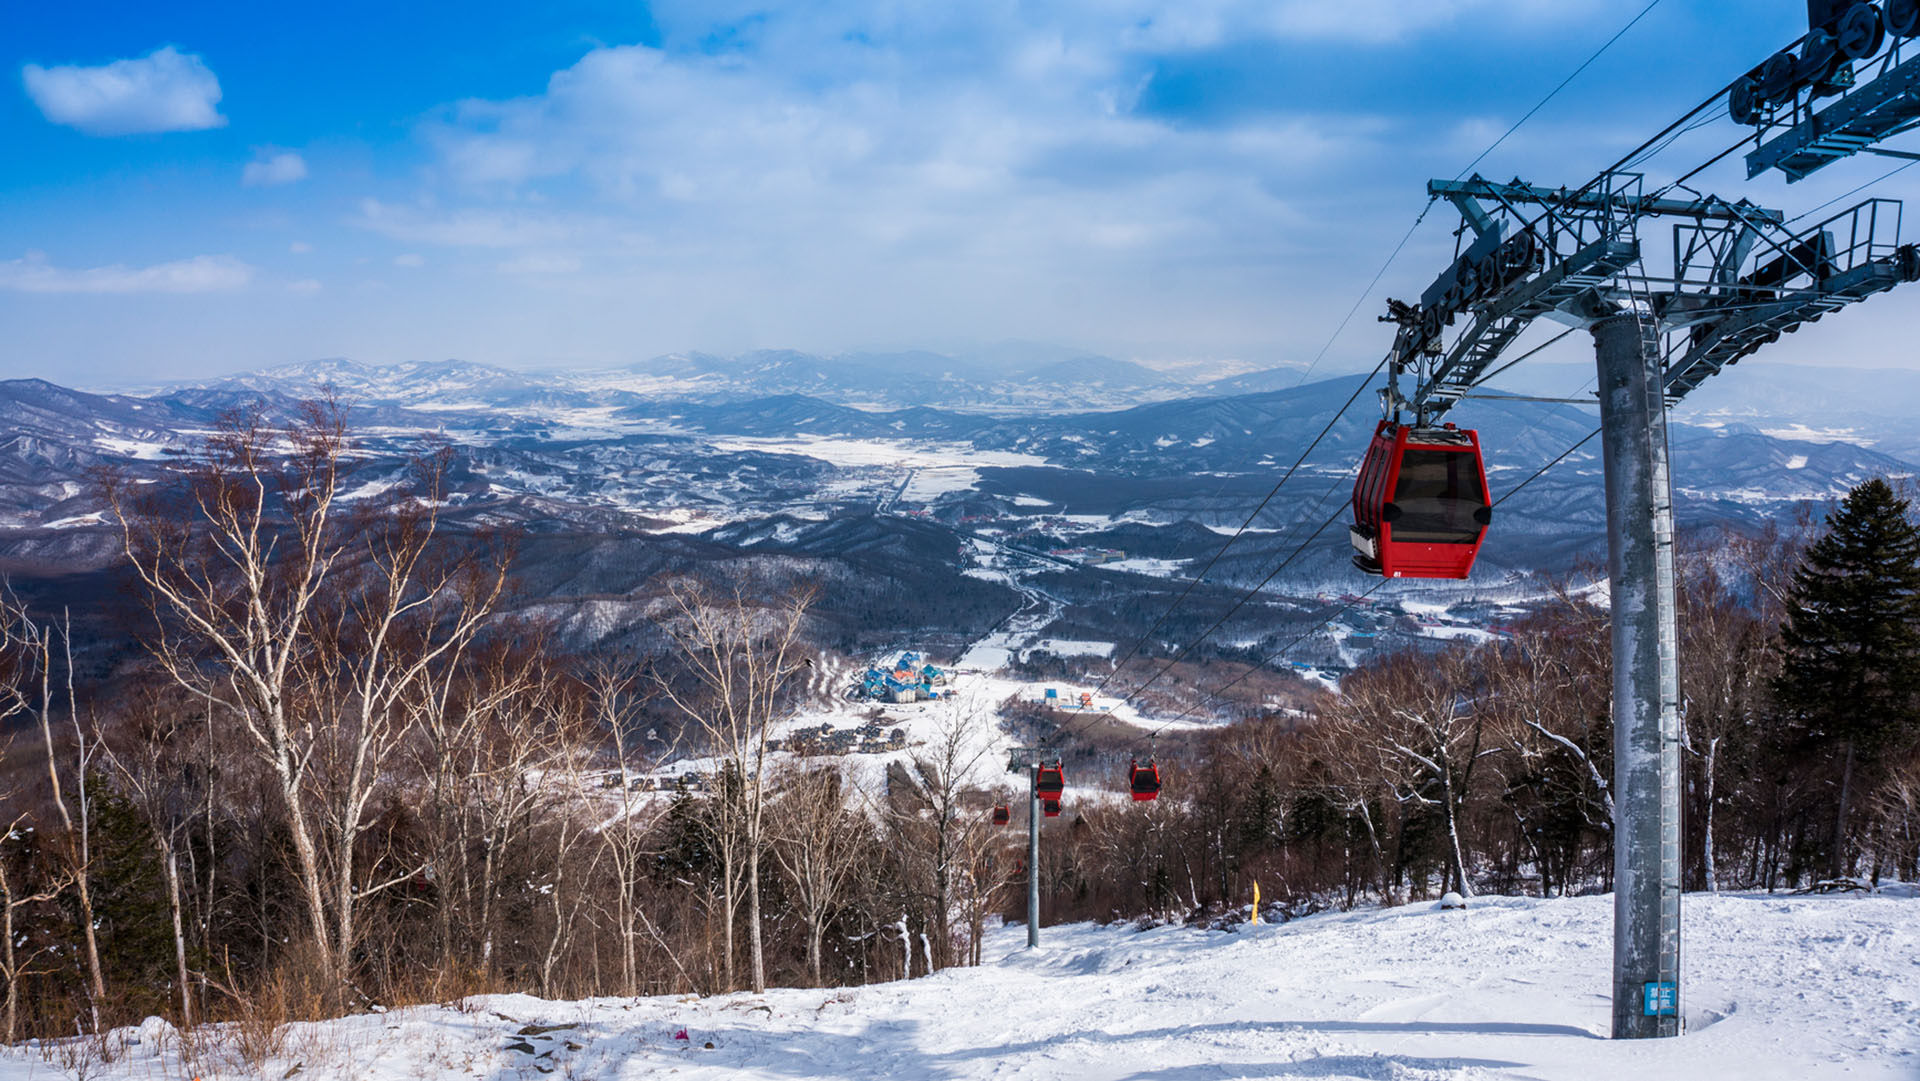 Skiing is growing rapidly in popularity in China